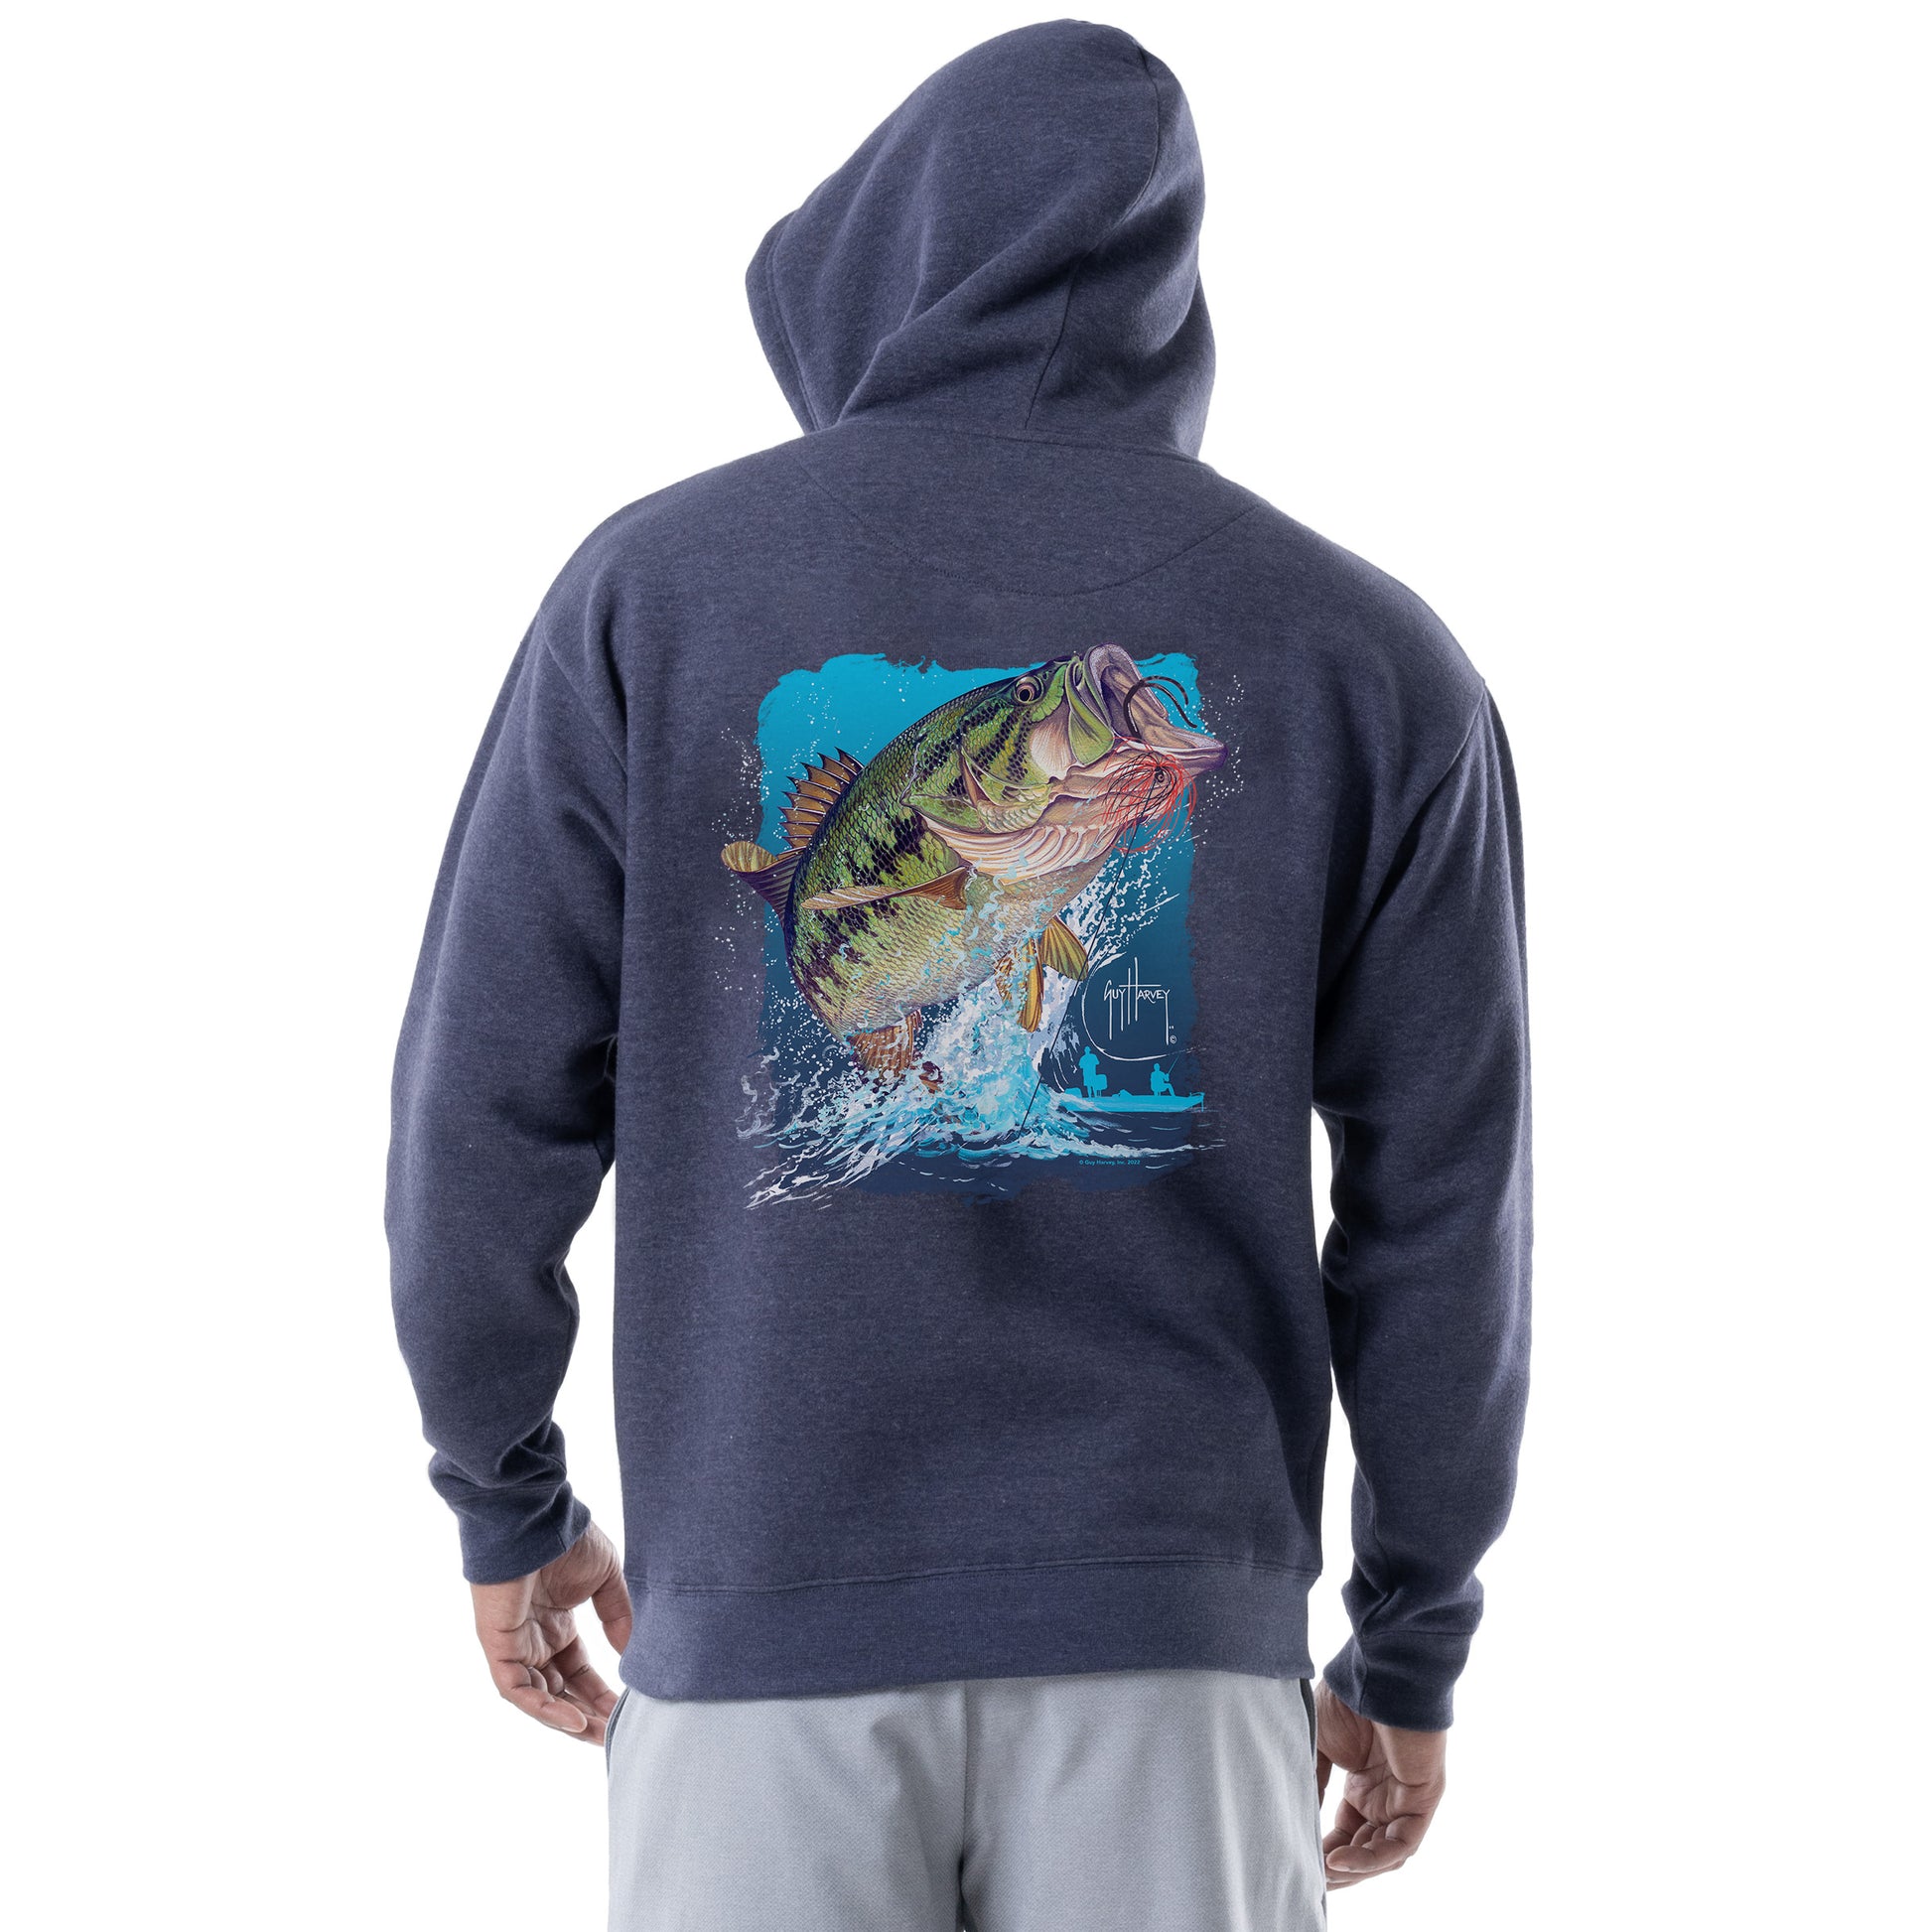 exposition affixe Volcanique bass hoodie Biscuit Condition